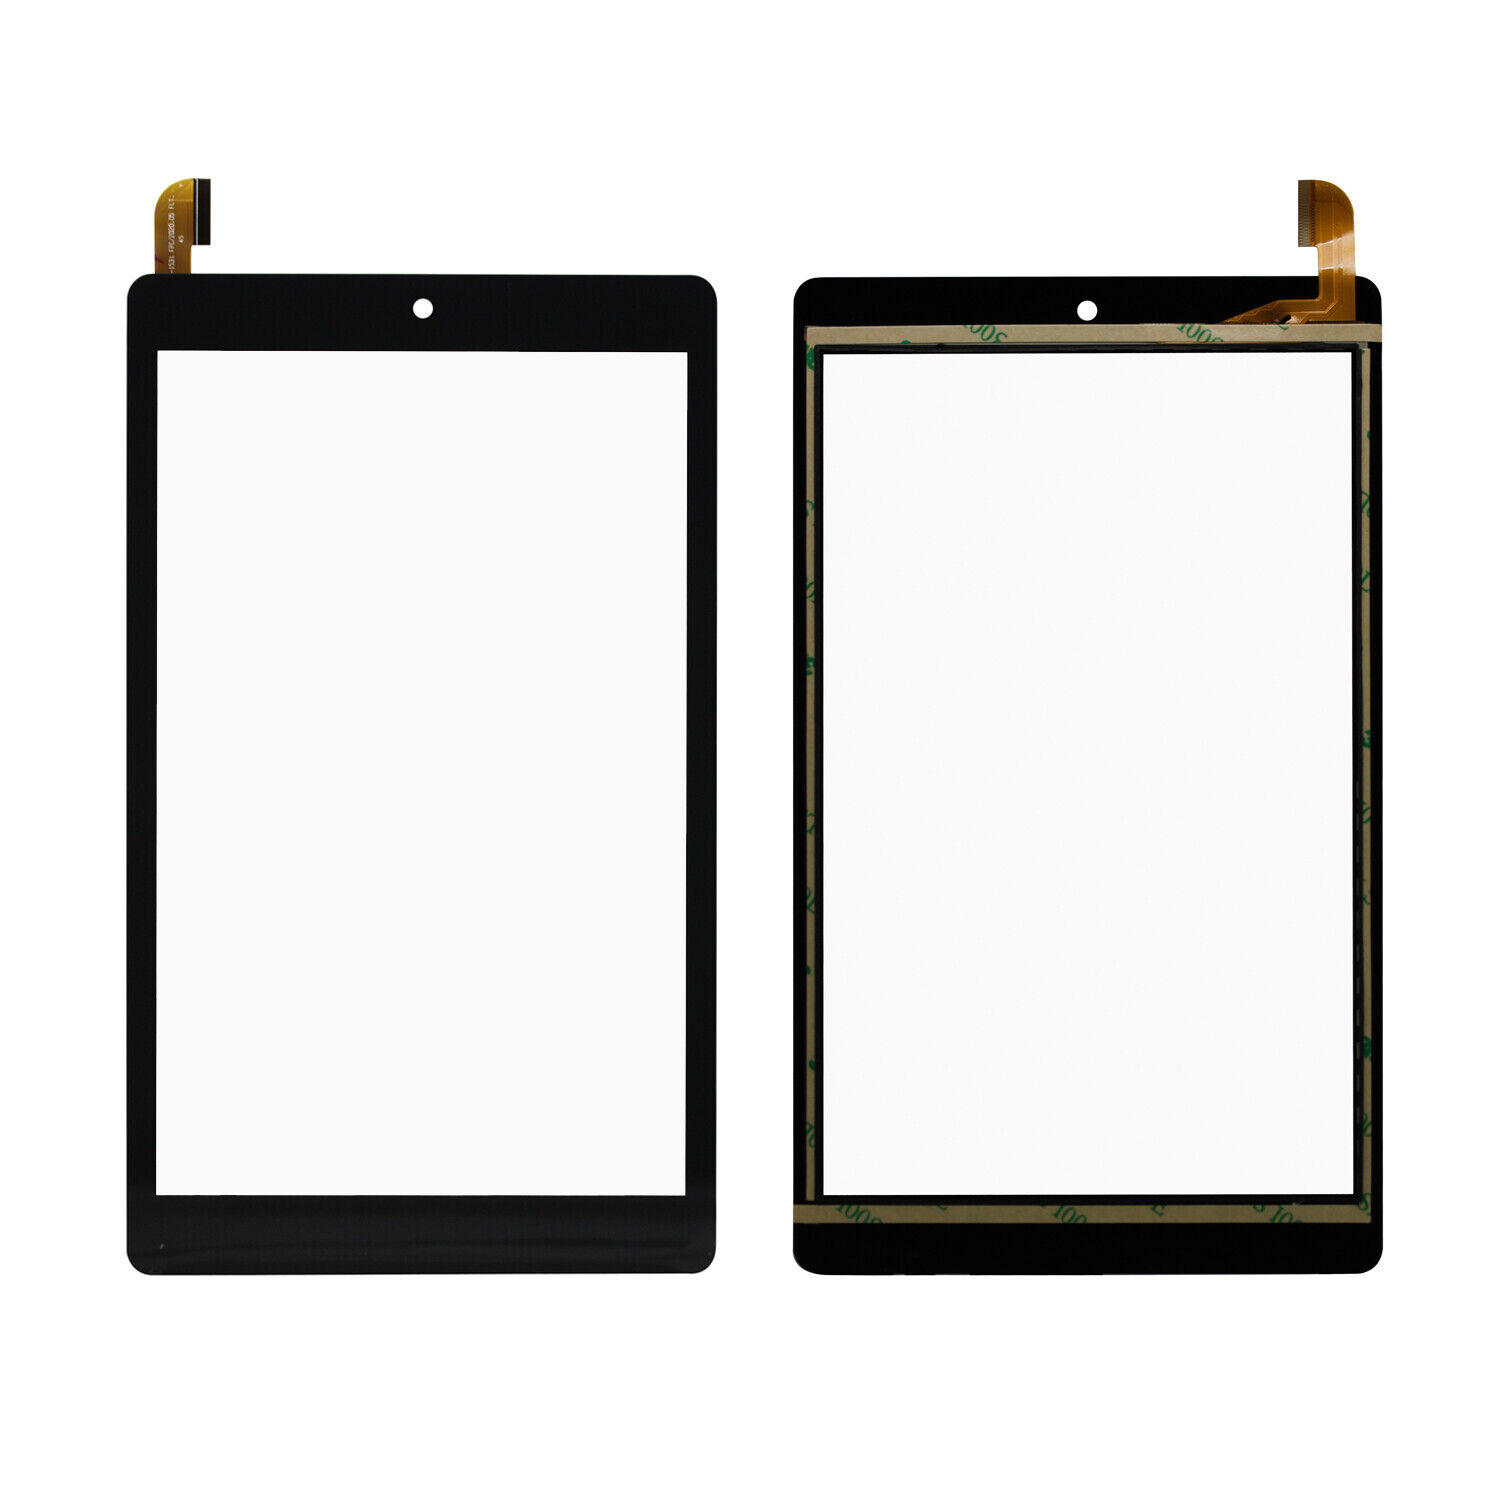 NEW Touch Screen Digitizer Glass For Onn. 8